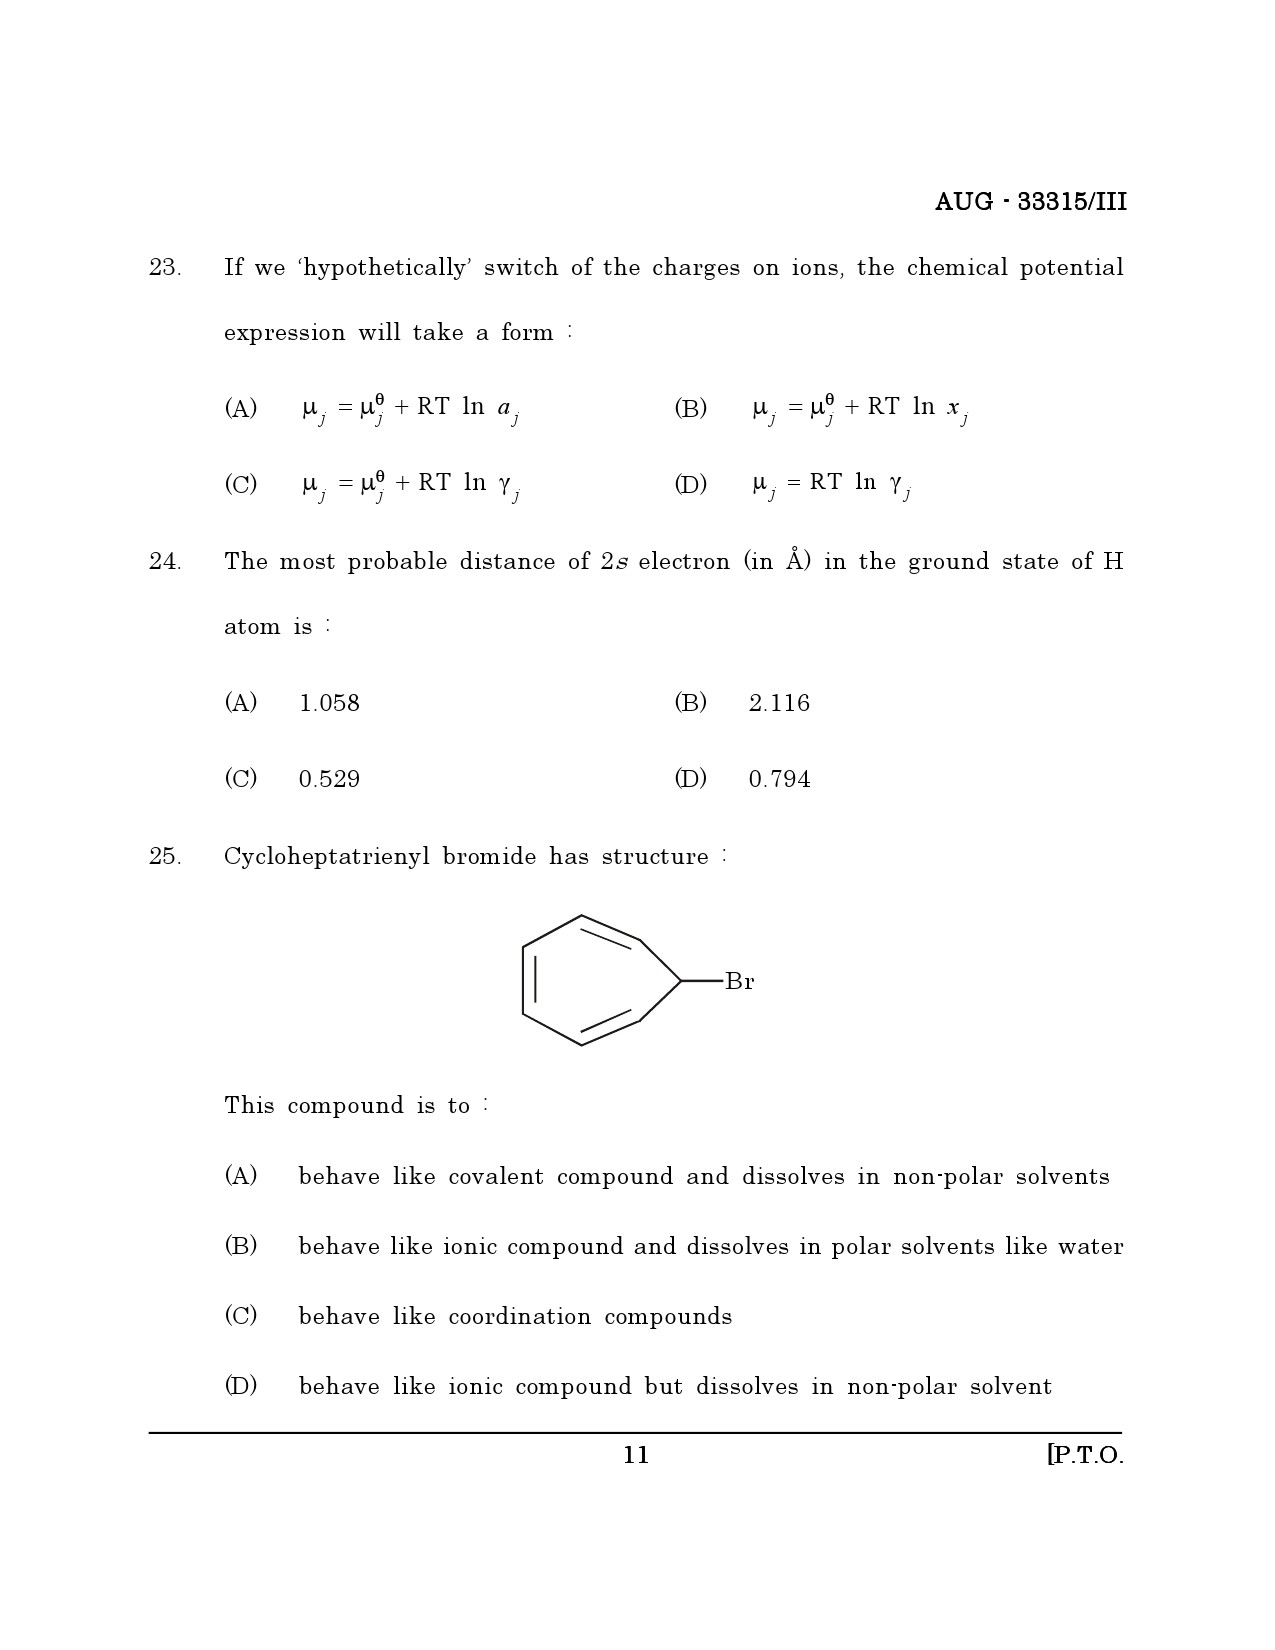 Maharashtra SET Chemical Sciences Question Paper III August 2015 10